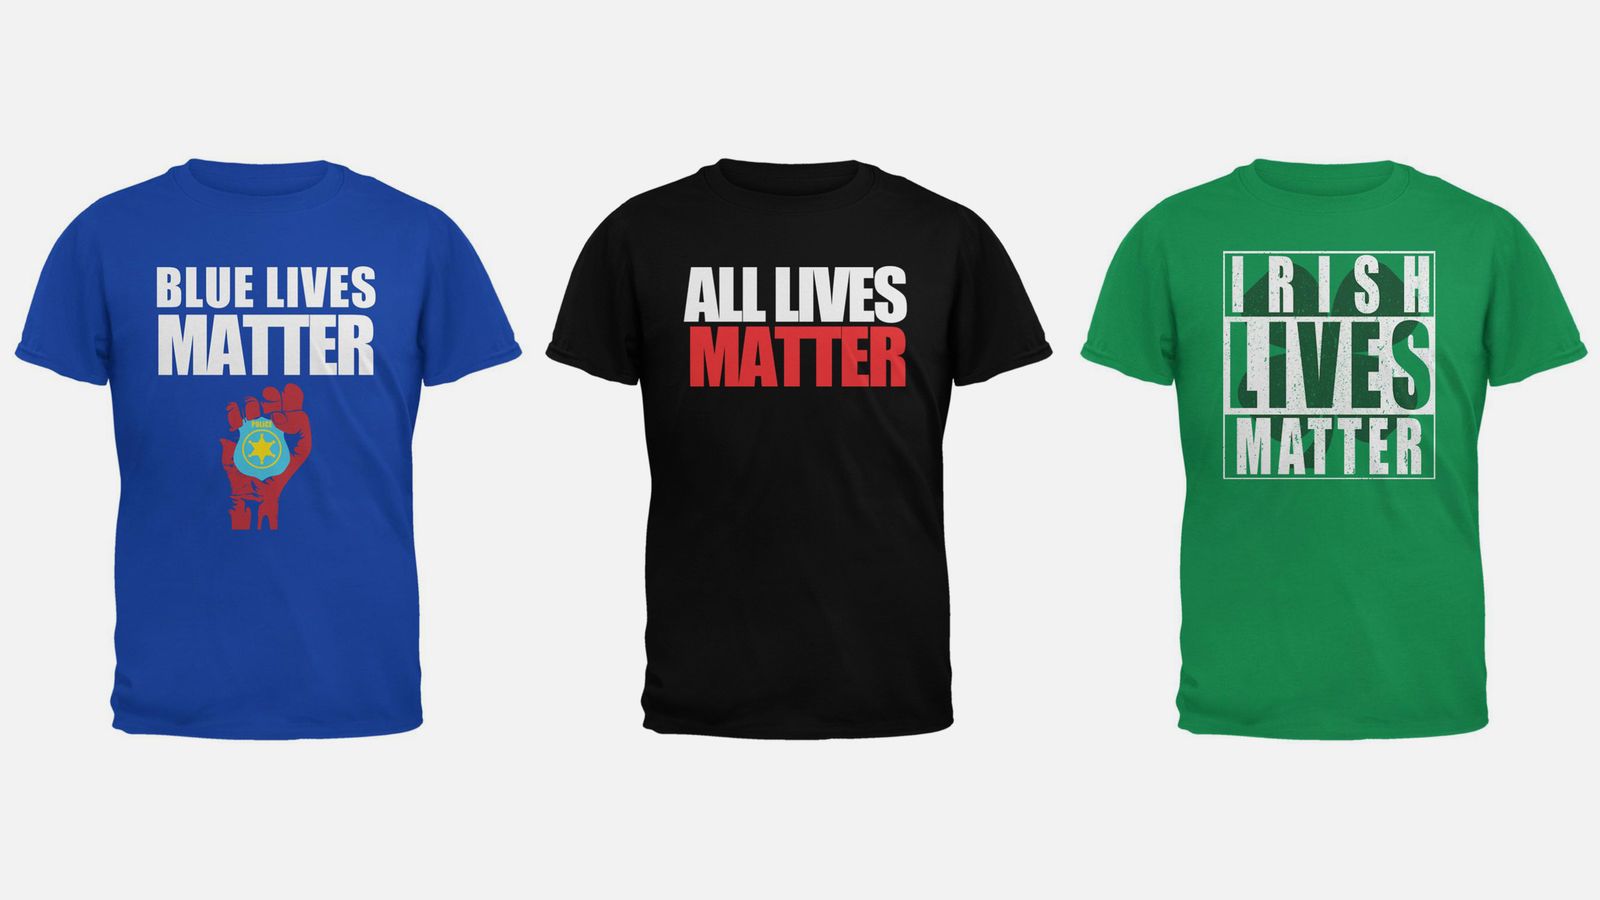 Walmart gets backlash over T-shirts with 'All Lives Matter' and